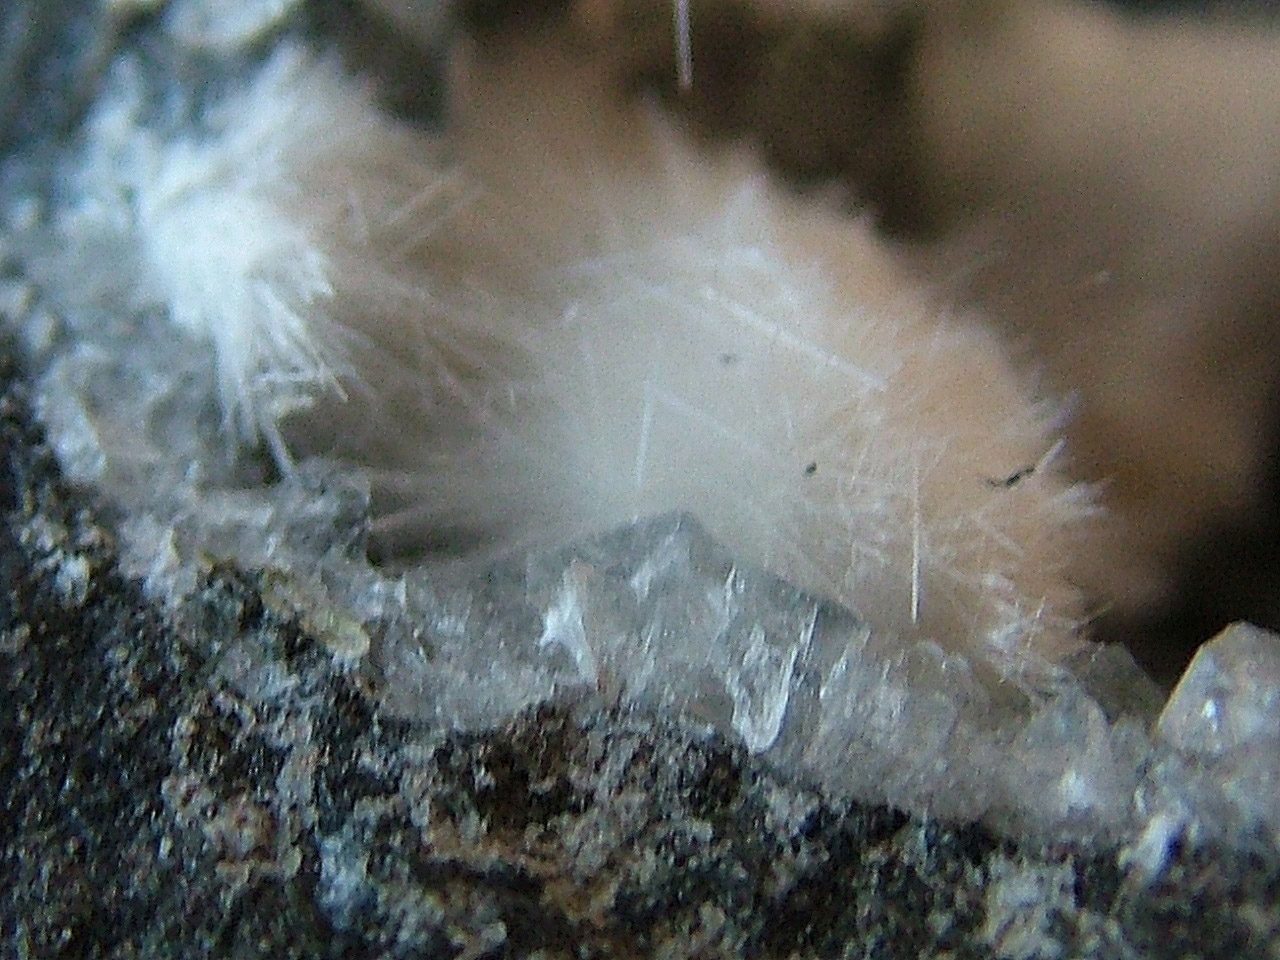 Mesolite With Chabazite